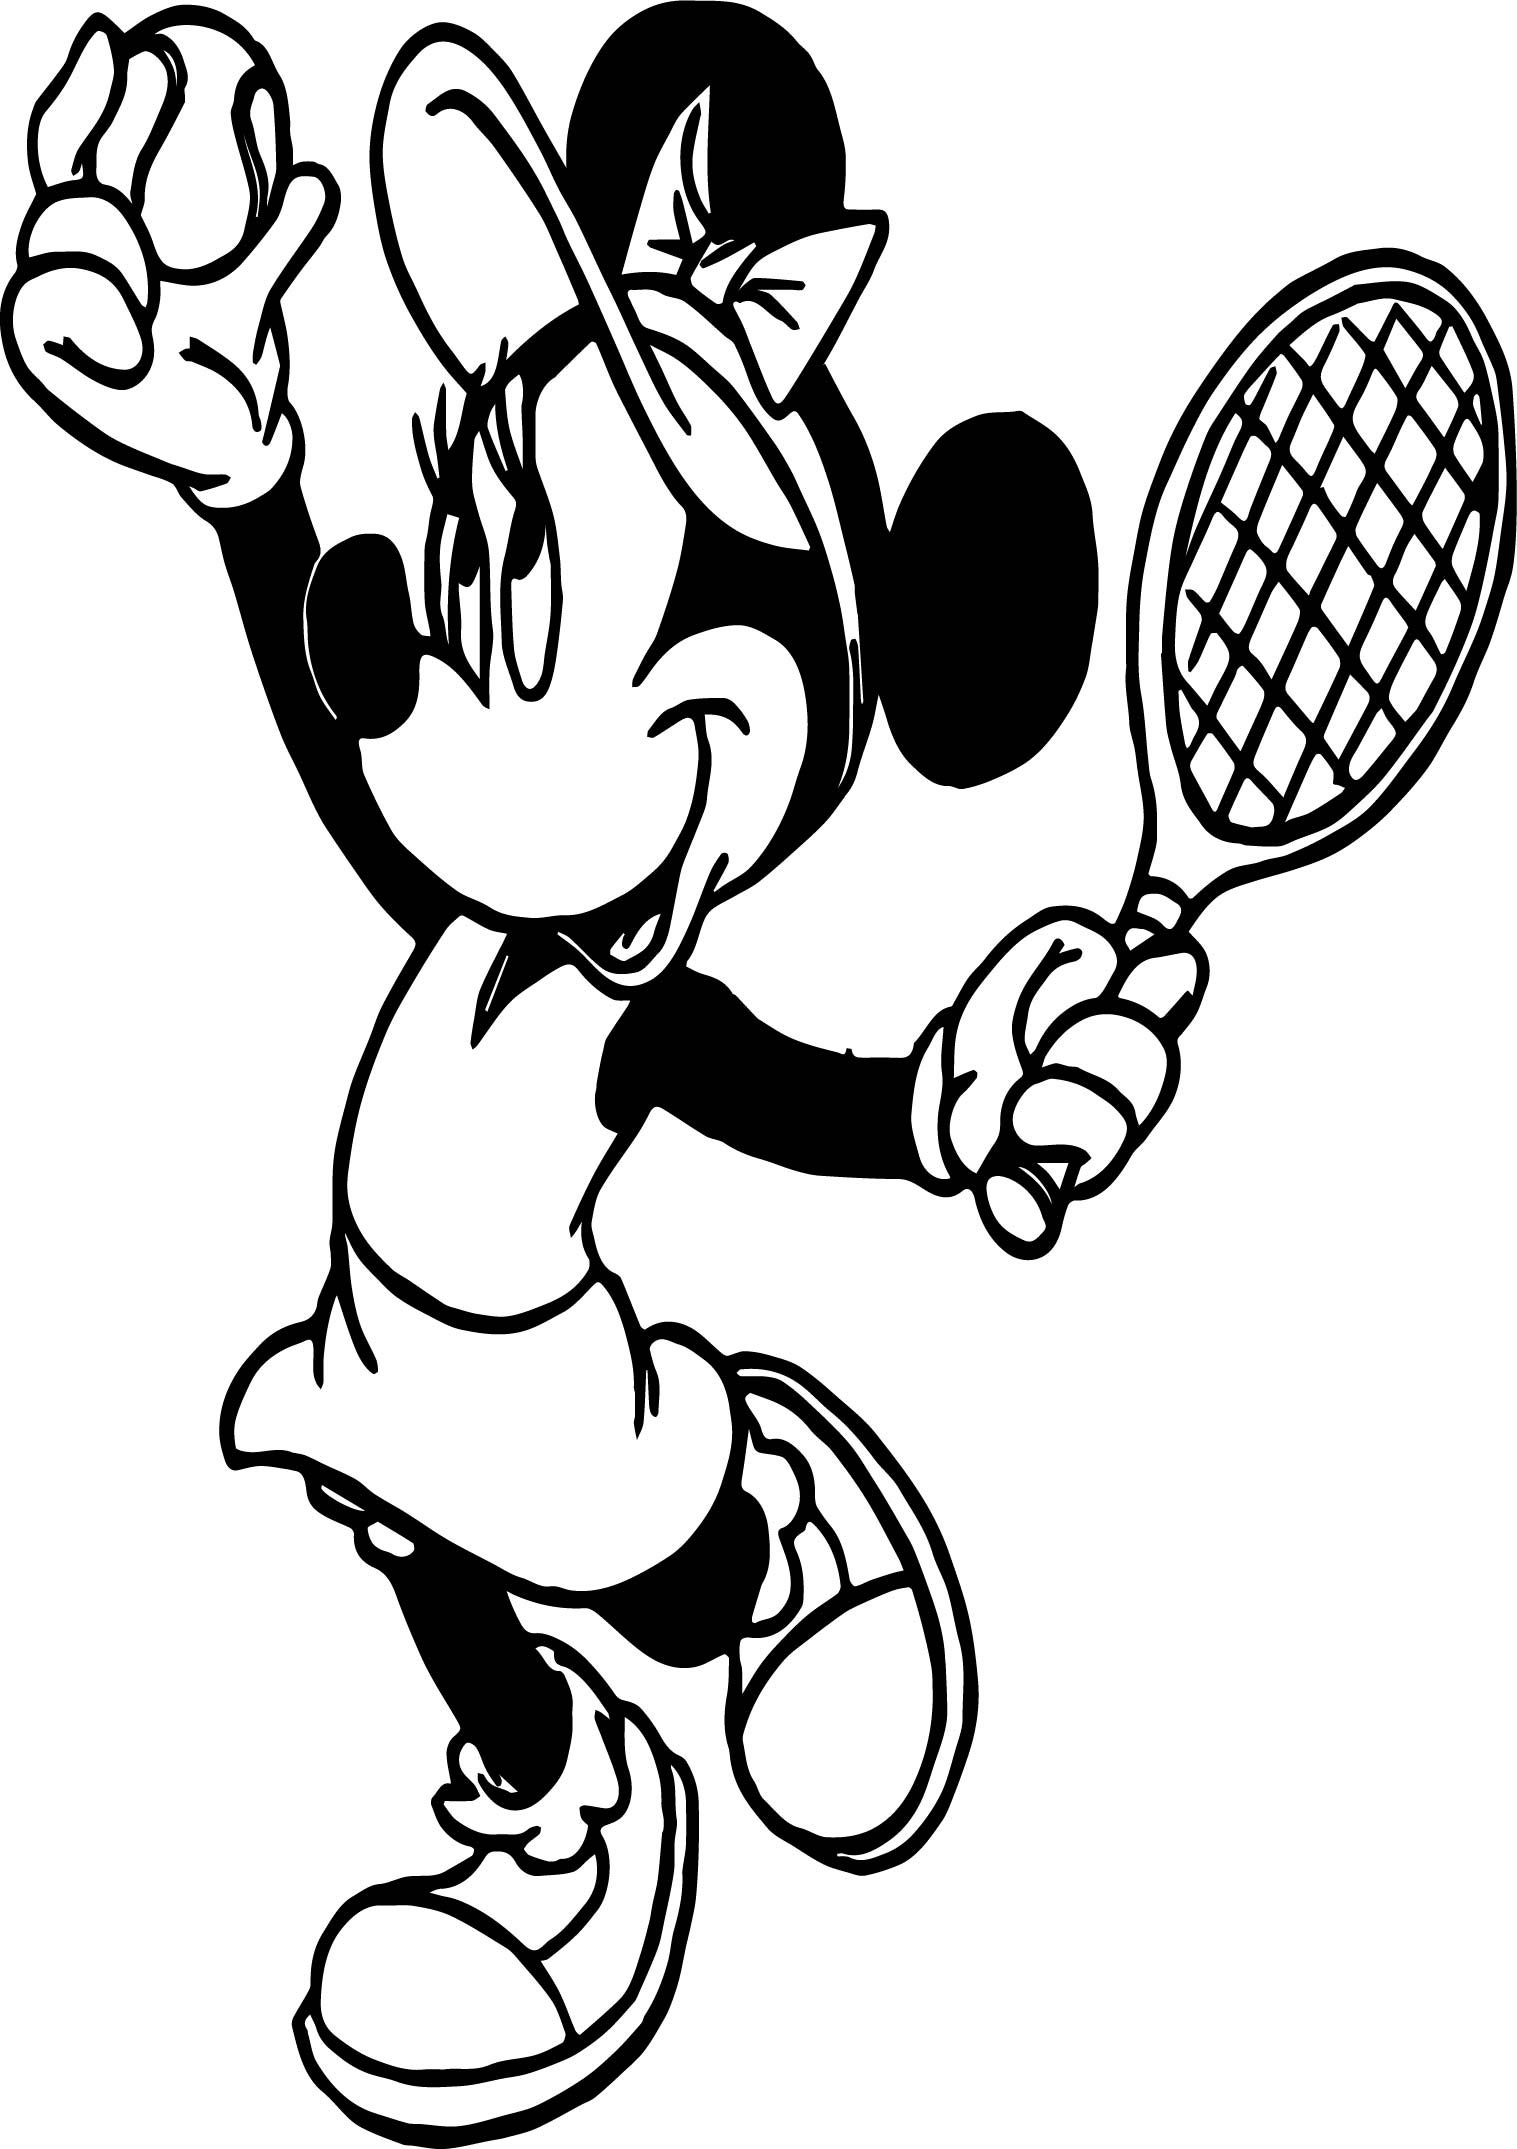 Minnie Mouse Playing Tennis Coloring Page